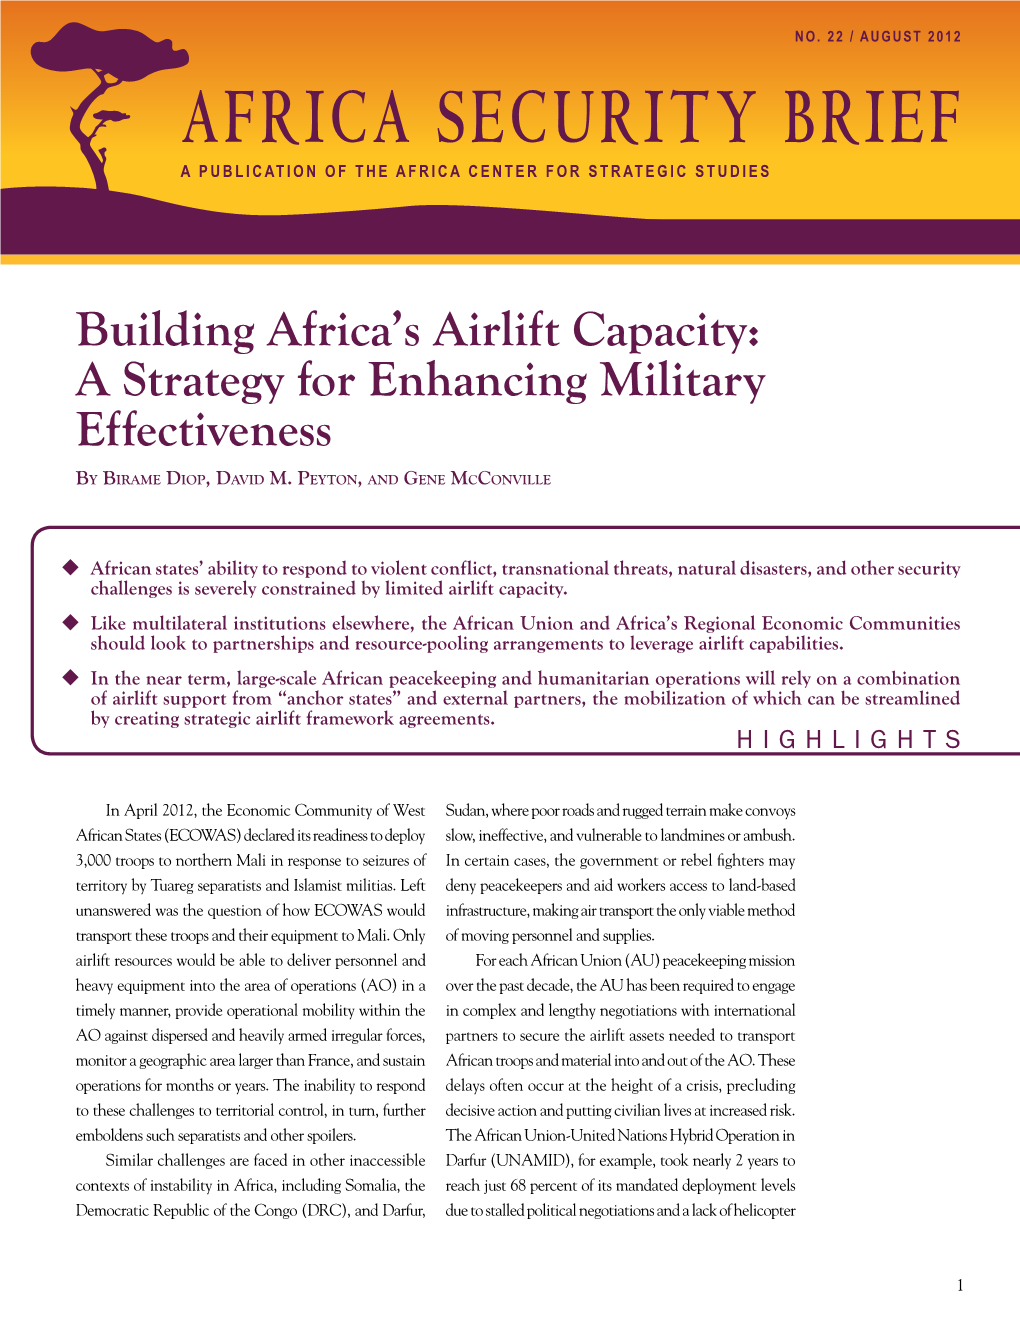 AFRICA SECURITY BRIEF a Publication of the Africa Center for Strategic Studies